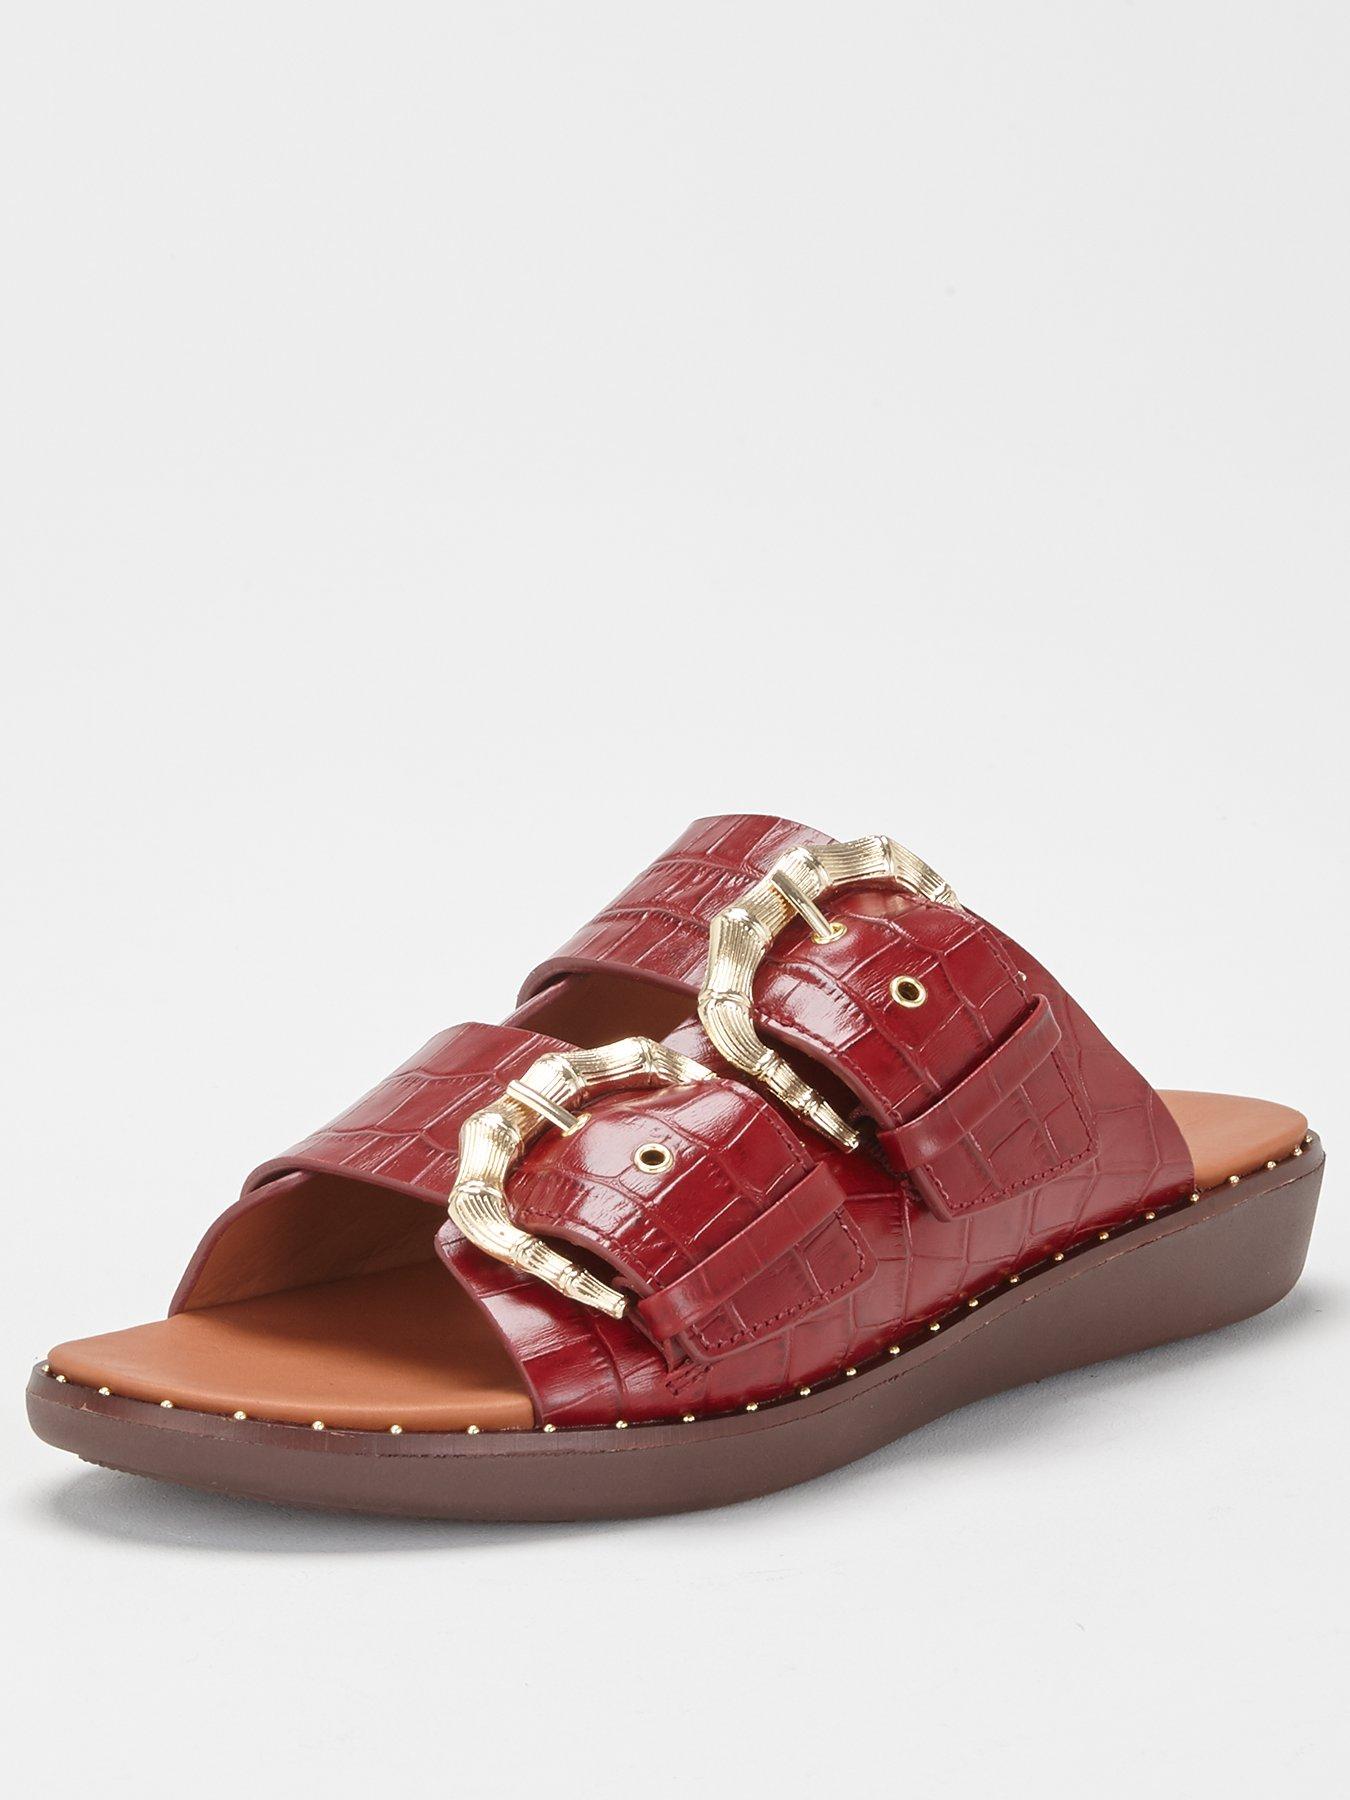 fitflop kaia